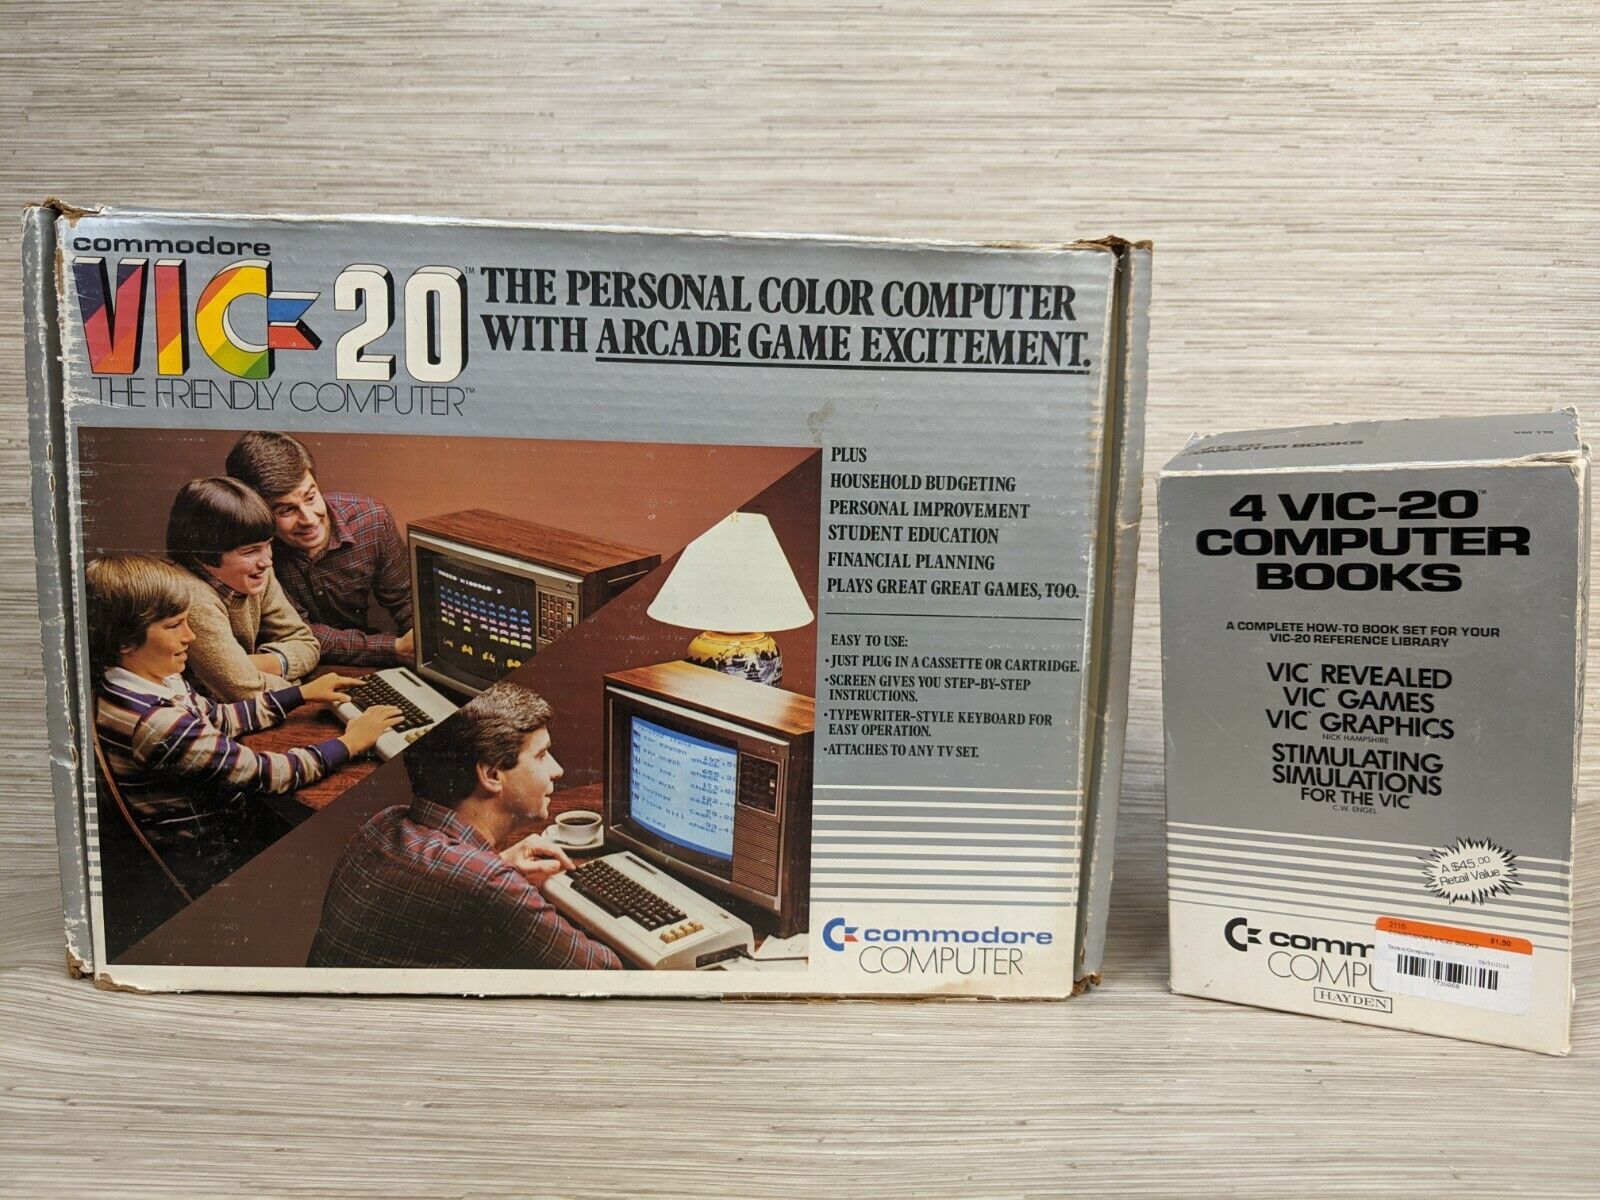 Vintage Commodore VIC-20 Personal Computer Video Game System & Programming Books